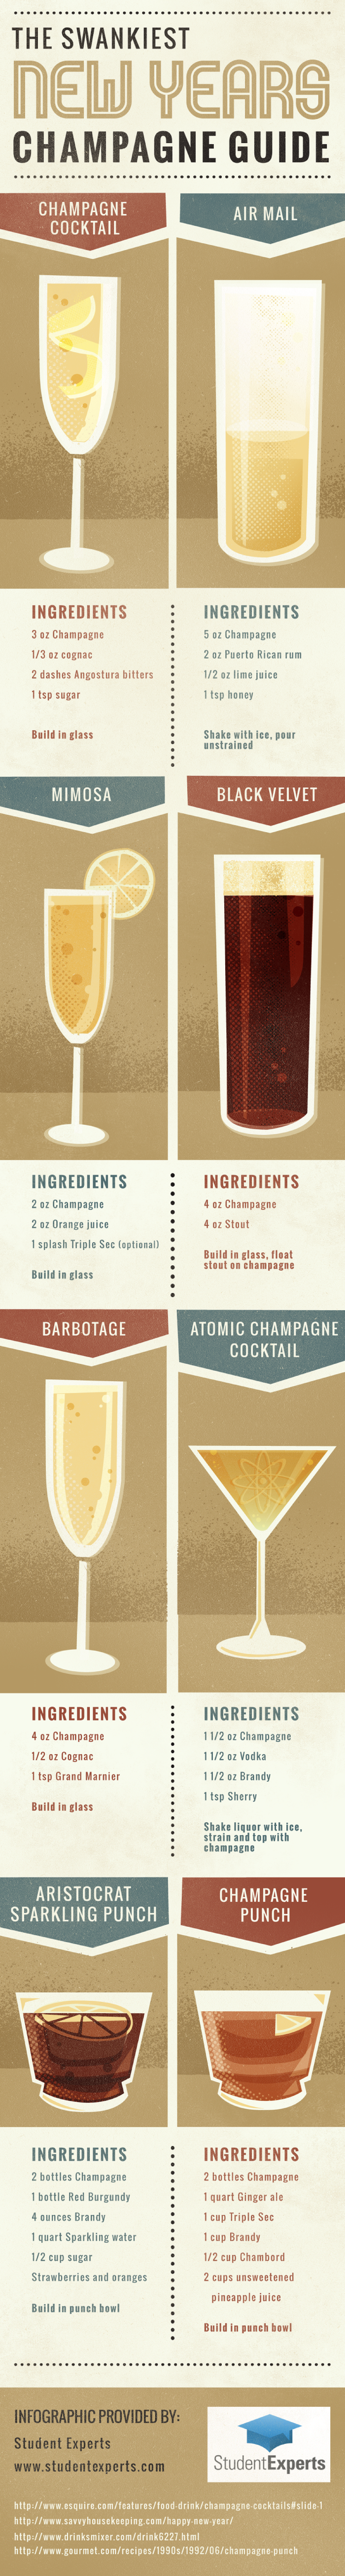 the-swankiest-new-years-champagne-guide_52b4b289acd051